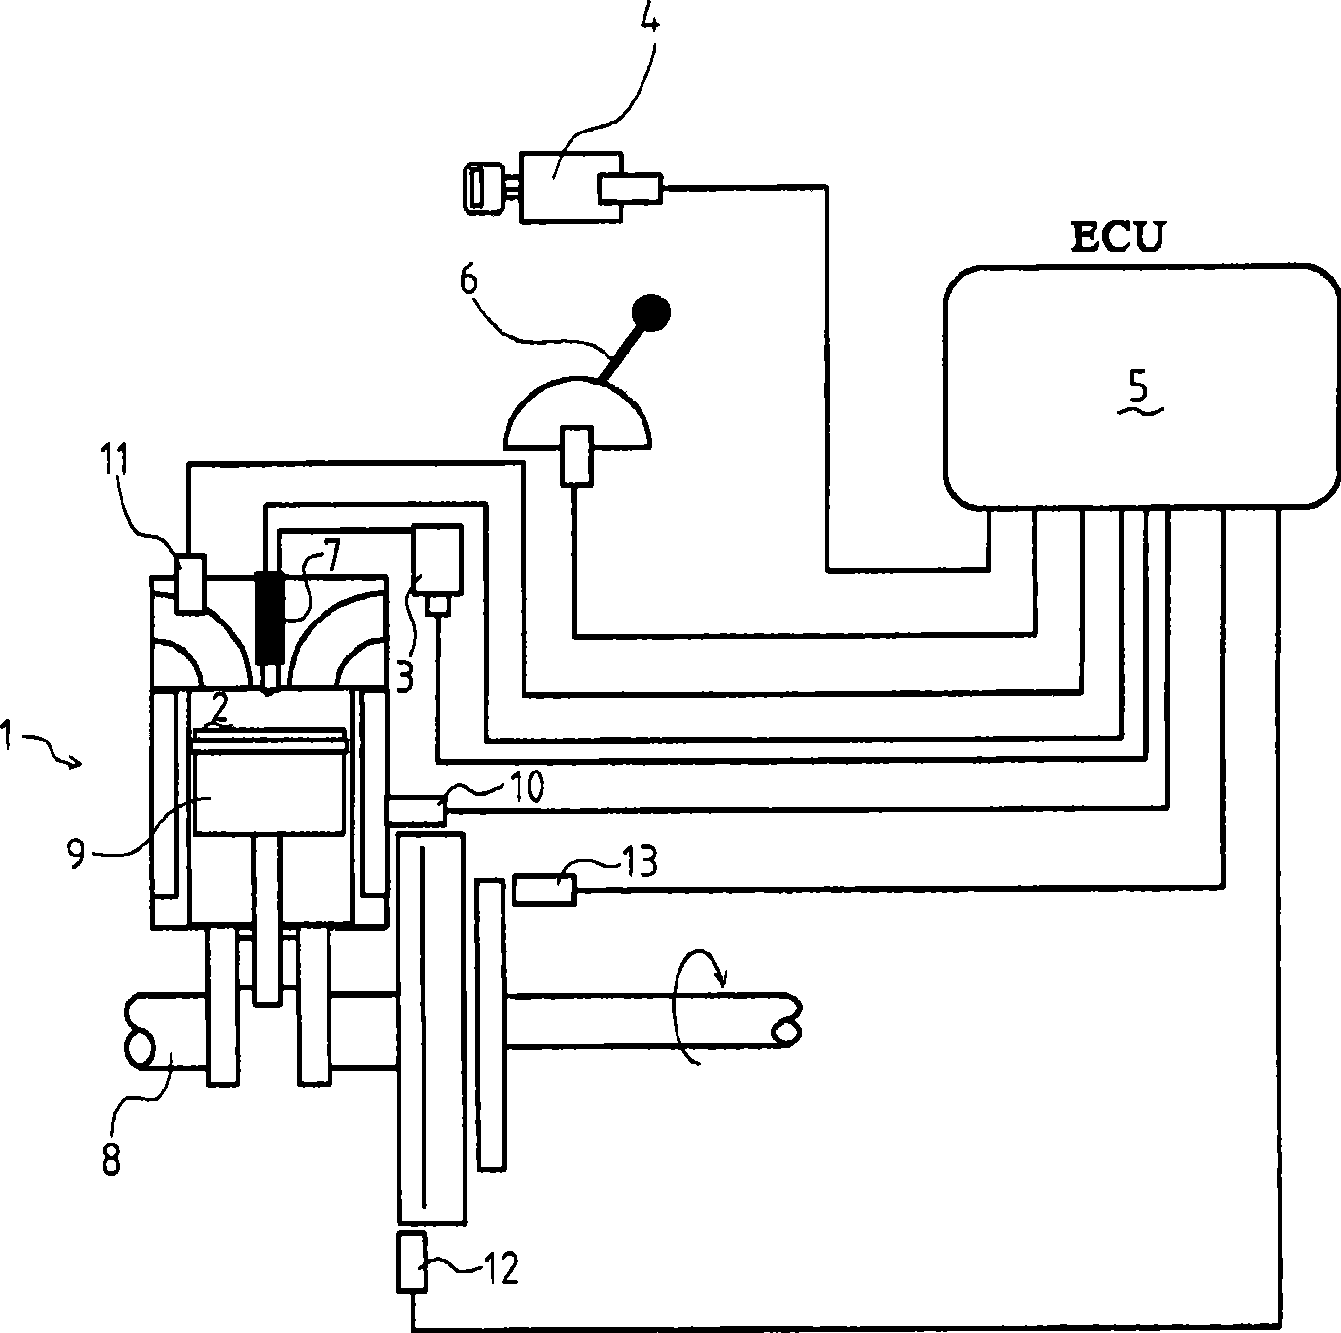 Method of controlling internal combustion engine